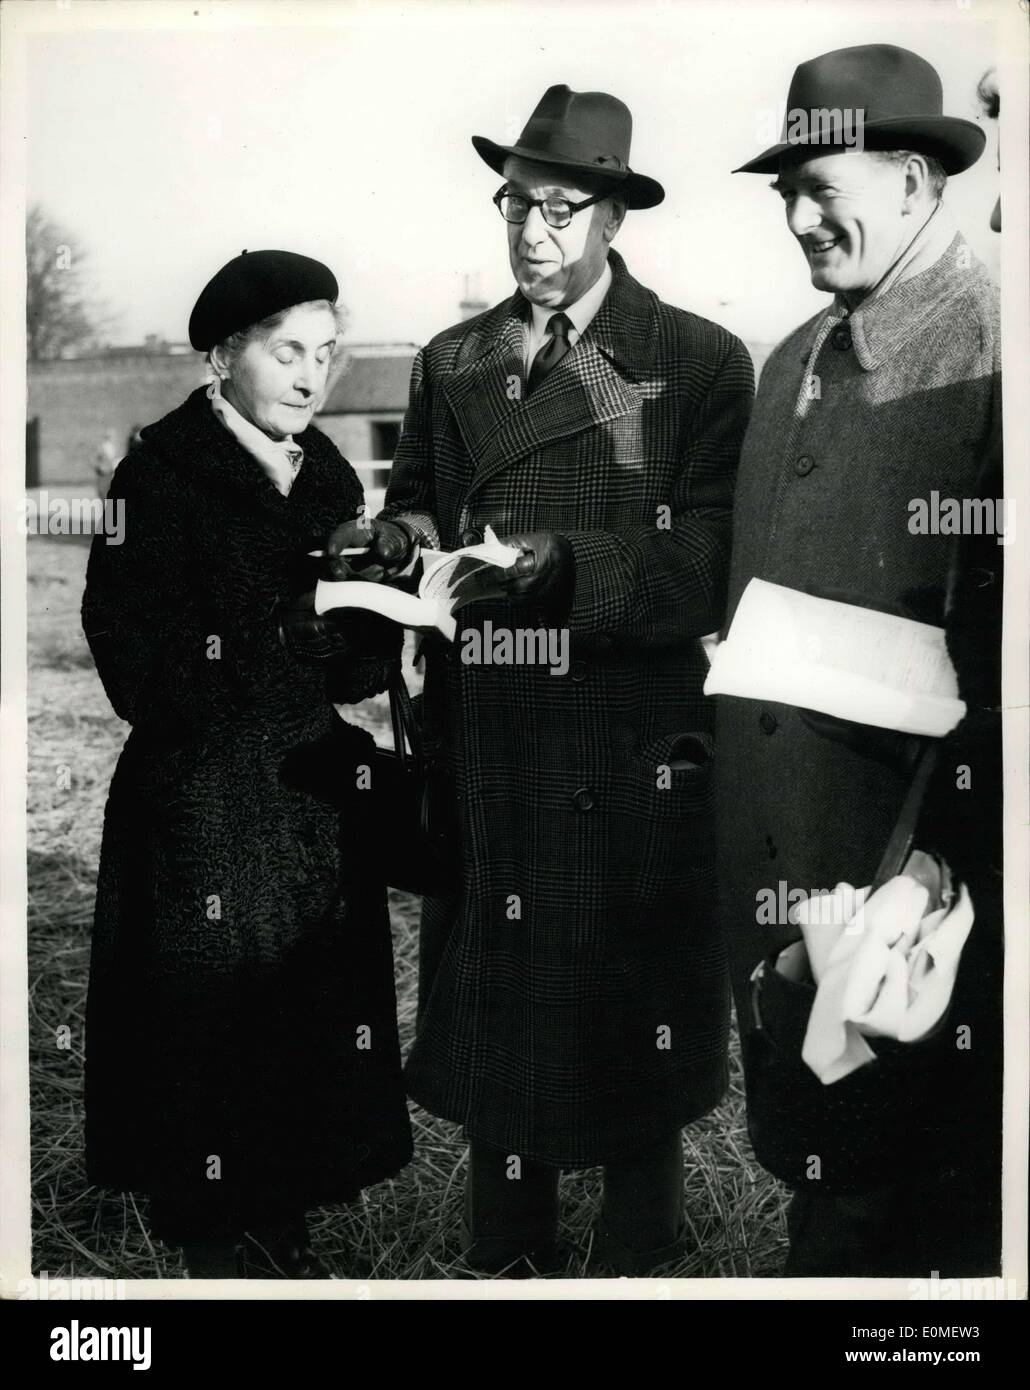 Dec. 06, 1954 - Opening of the Newmarket sales.. Owners from Denmark: A number of record prices were paid at the Bloodstock sales which opened at Newmarket today. Photo shows L-R : Mrs. Kiss Carl who owns the biggest stud farm in Jutland, Denmark; with in center Mr. H.C. Walton; and Mr. Fritz Auckenthaler von Thurnstein an Austrian racehorse owner who lives in Copenhagen - seen at the sales today. Stock Photo